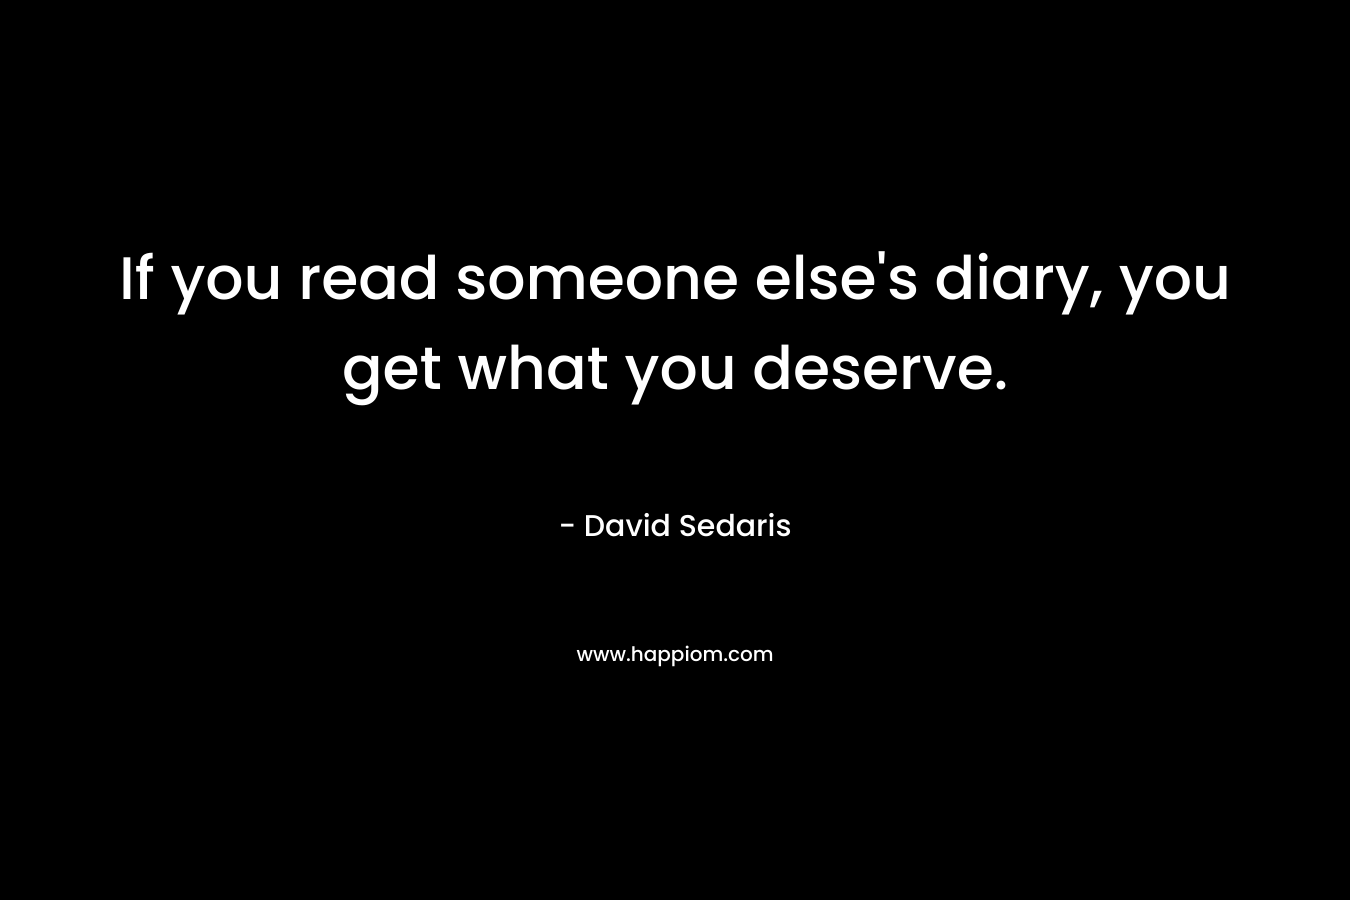 If you read someone else’s diary, you get what you deserve. – David Sedaris